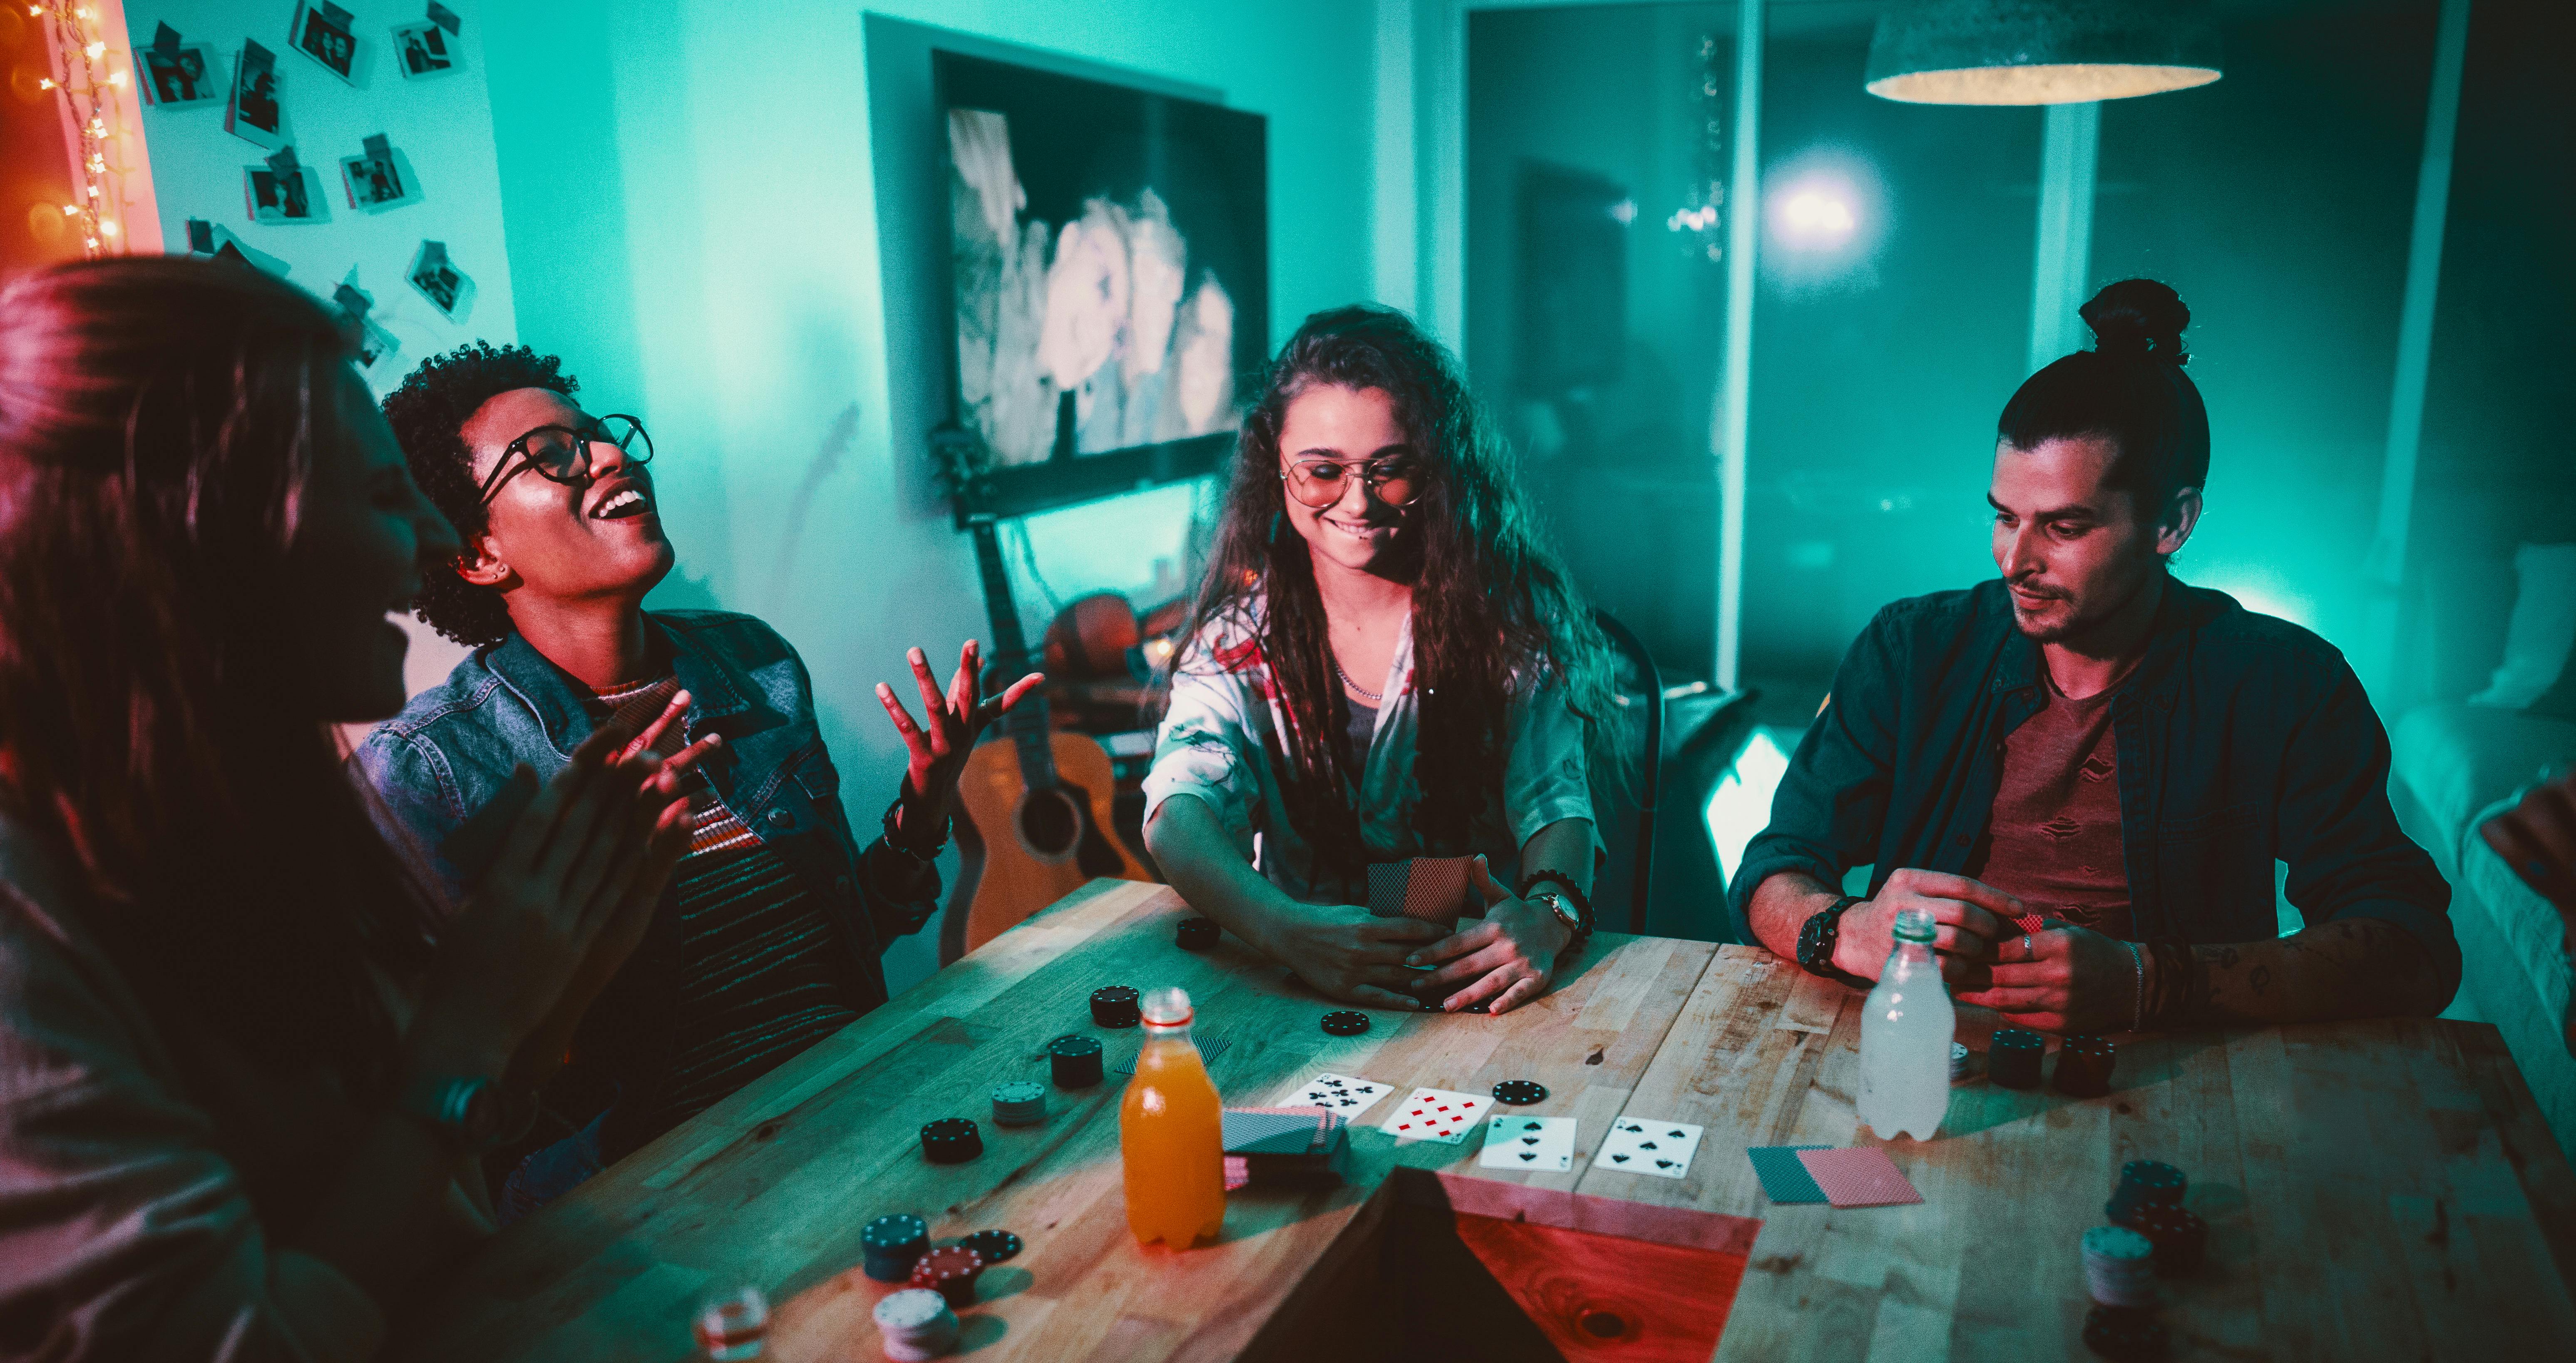 In this article, we cover all the best weed games for getting high with friends. Here, three friends are shown playing a card game